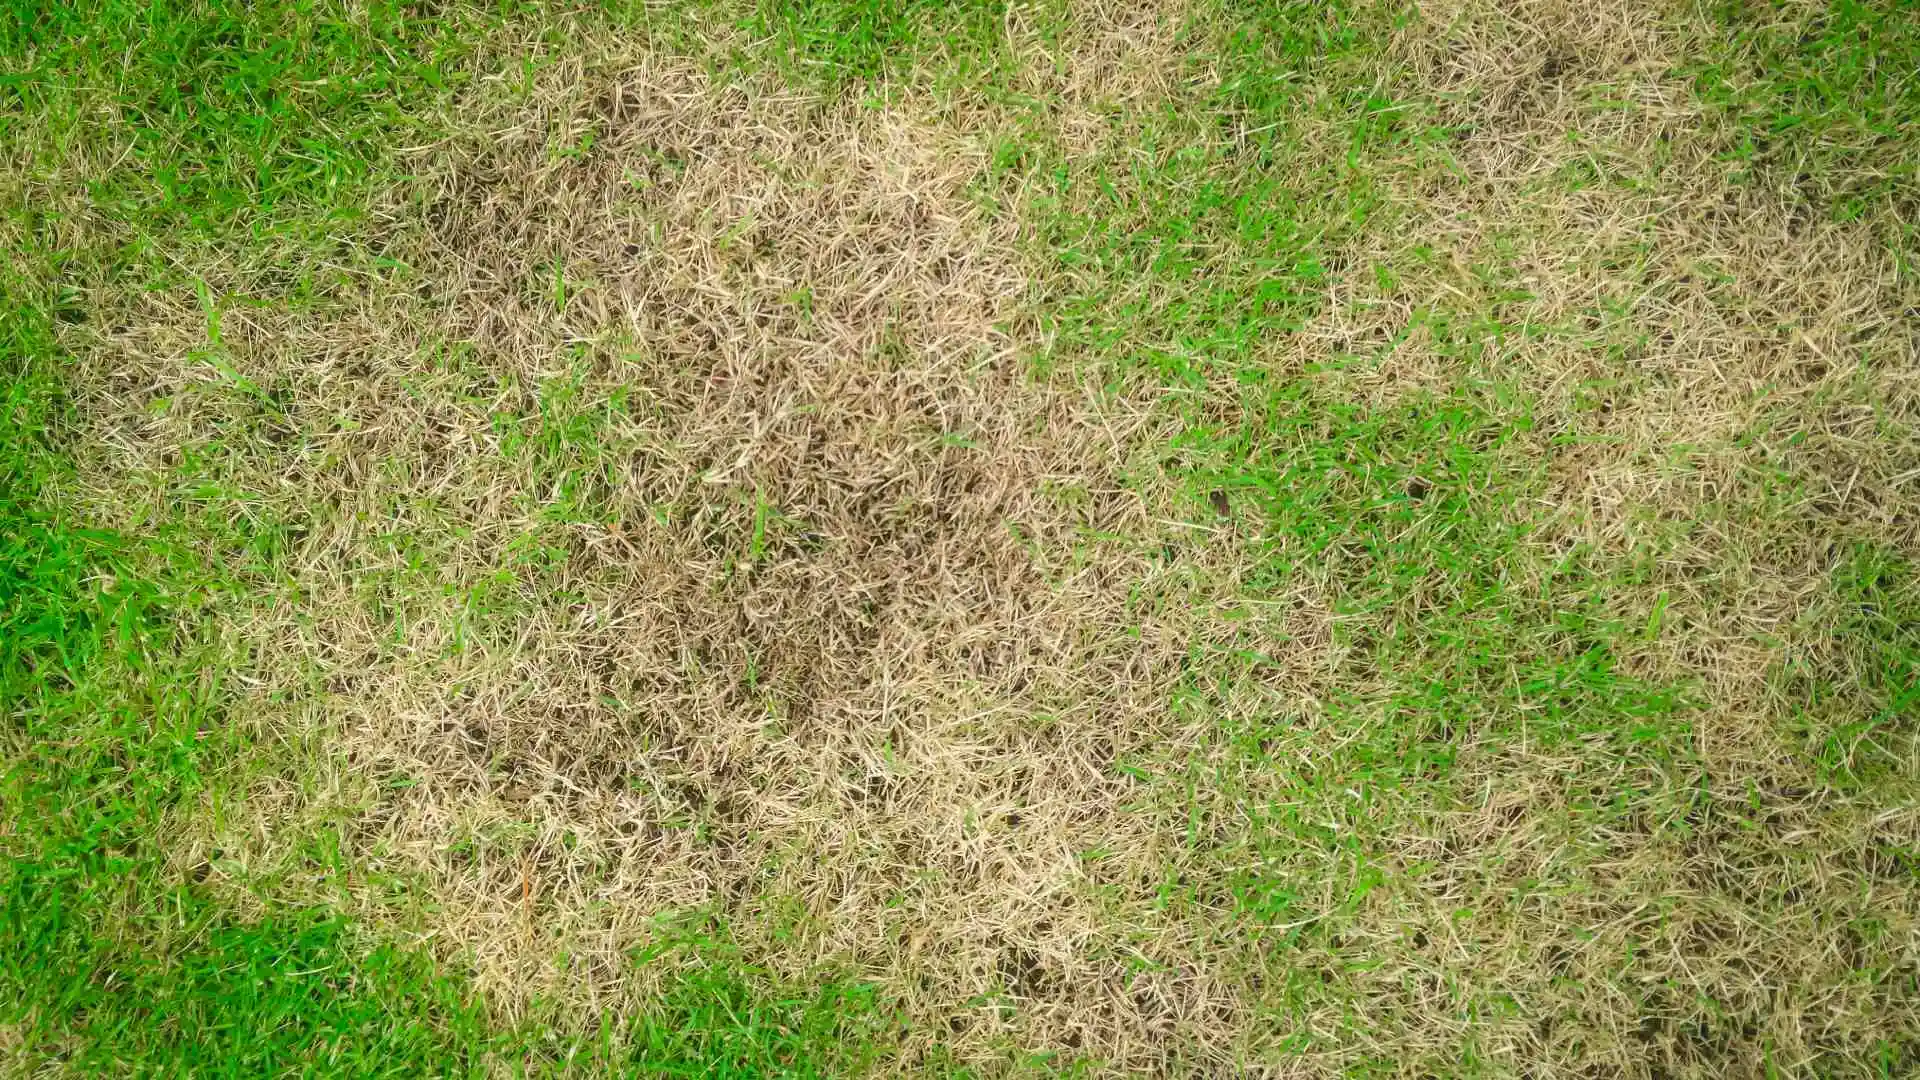 3 Common Lawn Diseases in Ohio to Look Out for This Spring